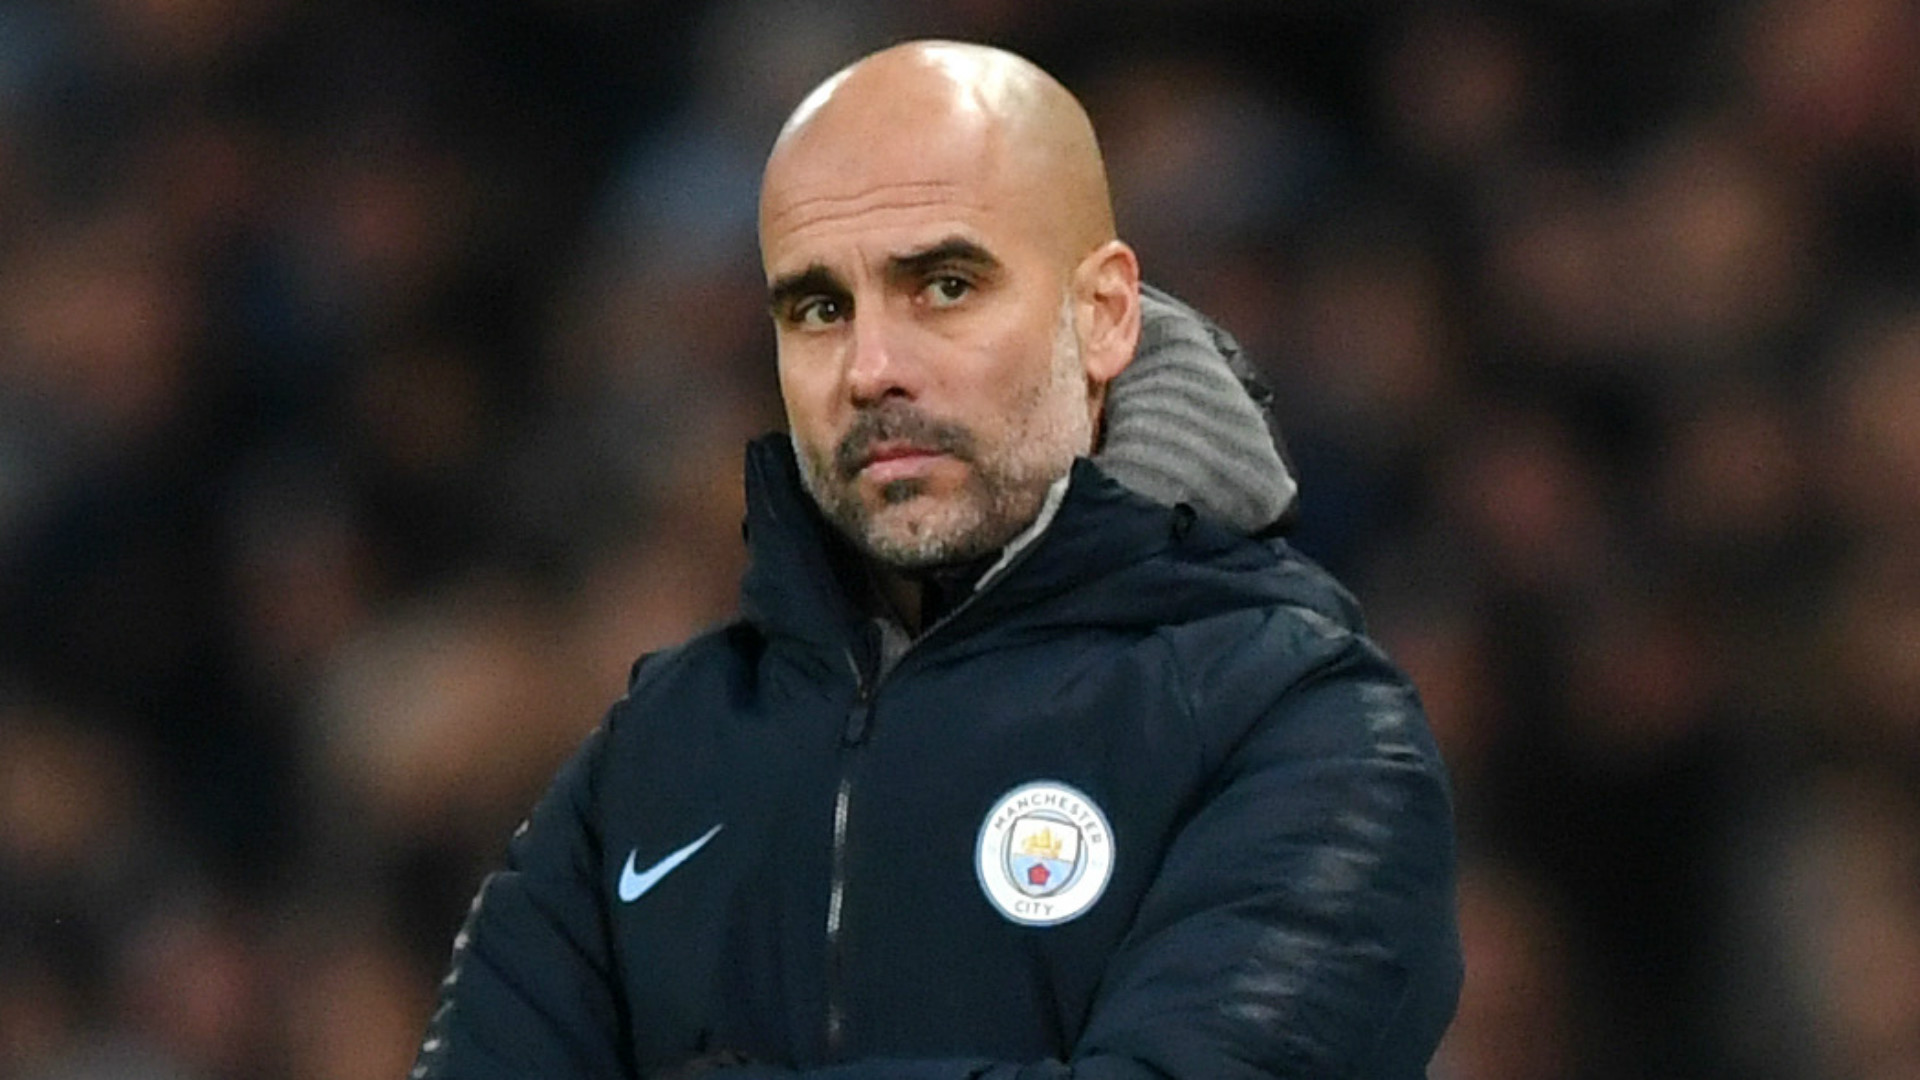 Man City transfer targets: Pep Guardiola considering new left-back and confirms 